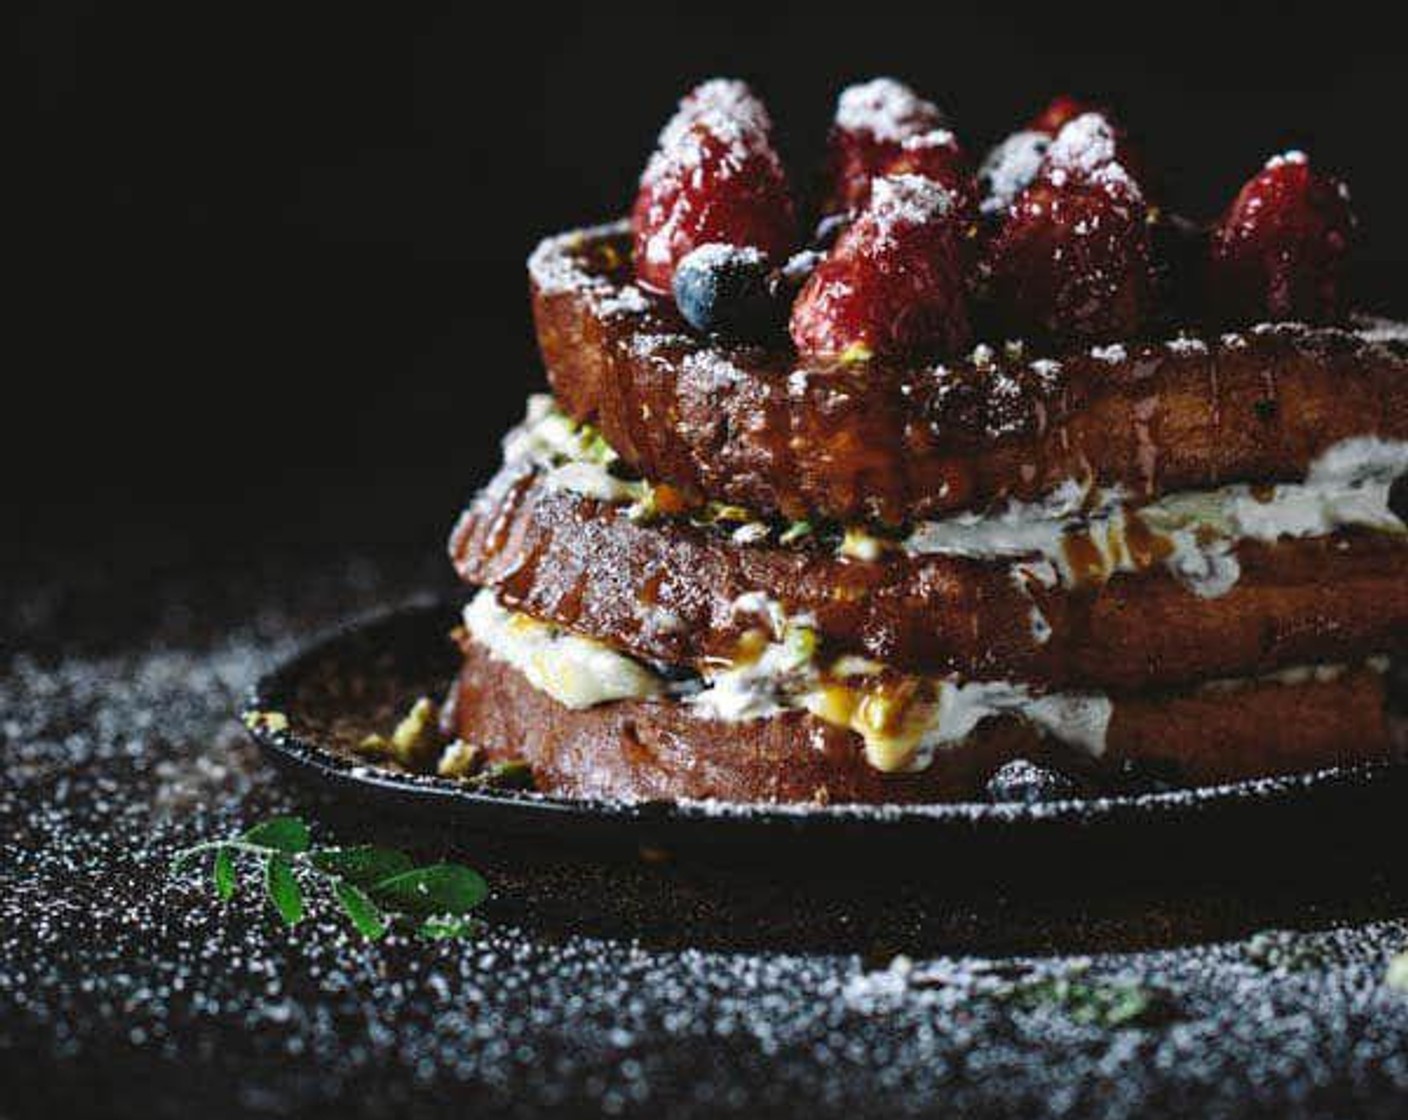 Brioche French Toast with Berries and Caramel Sauce